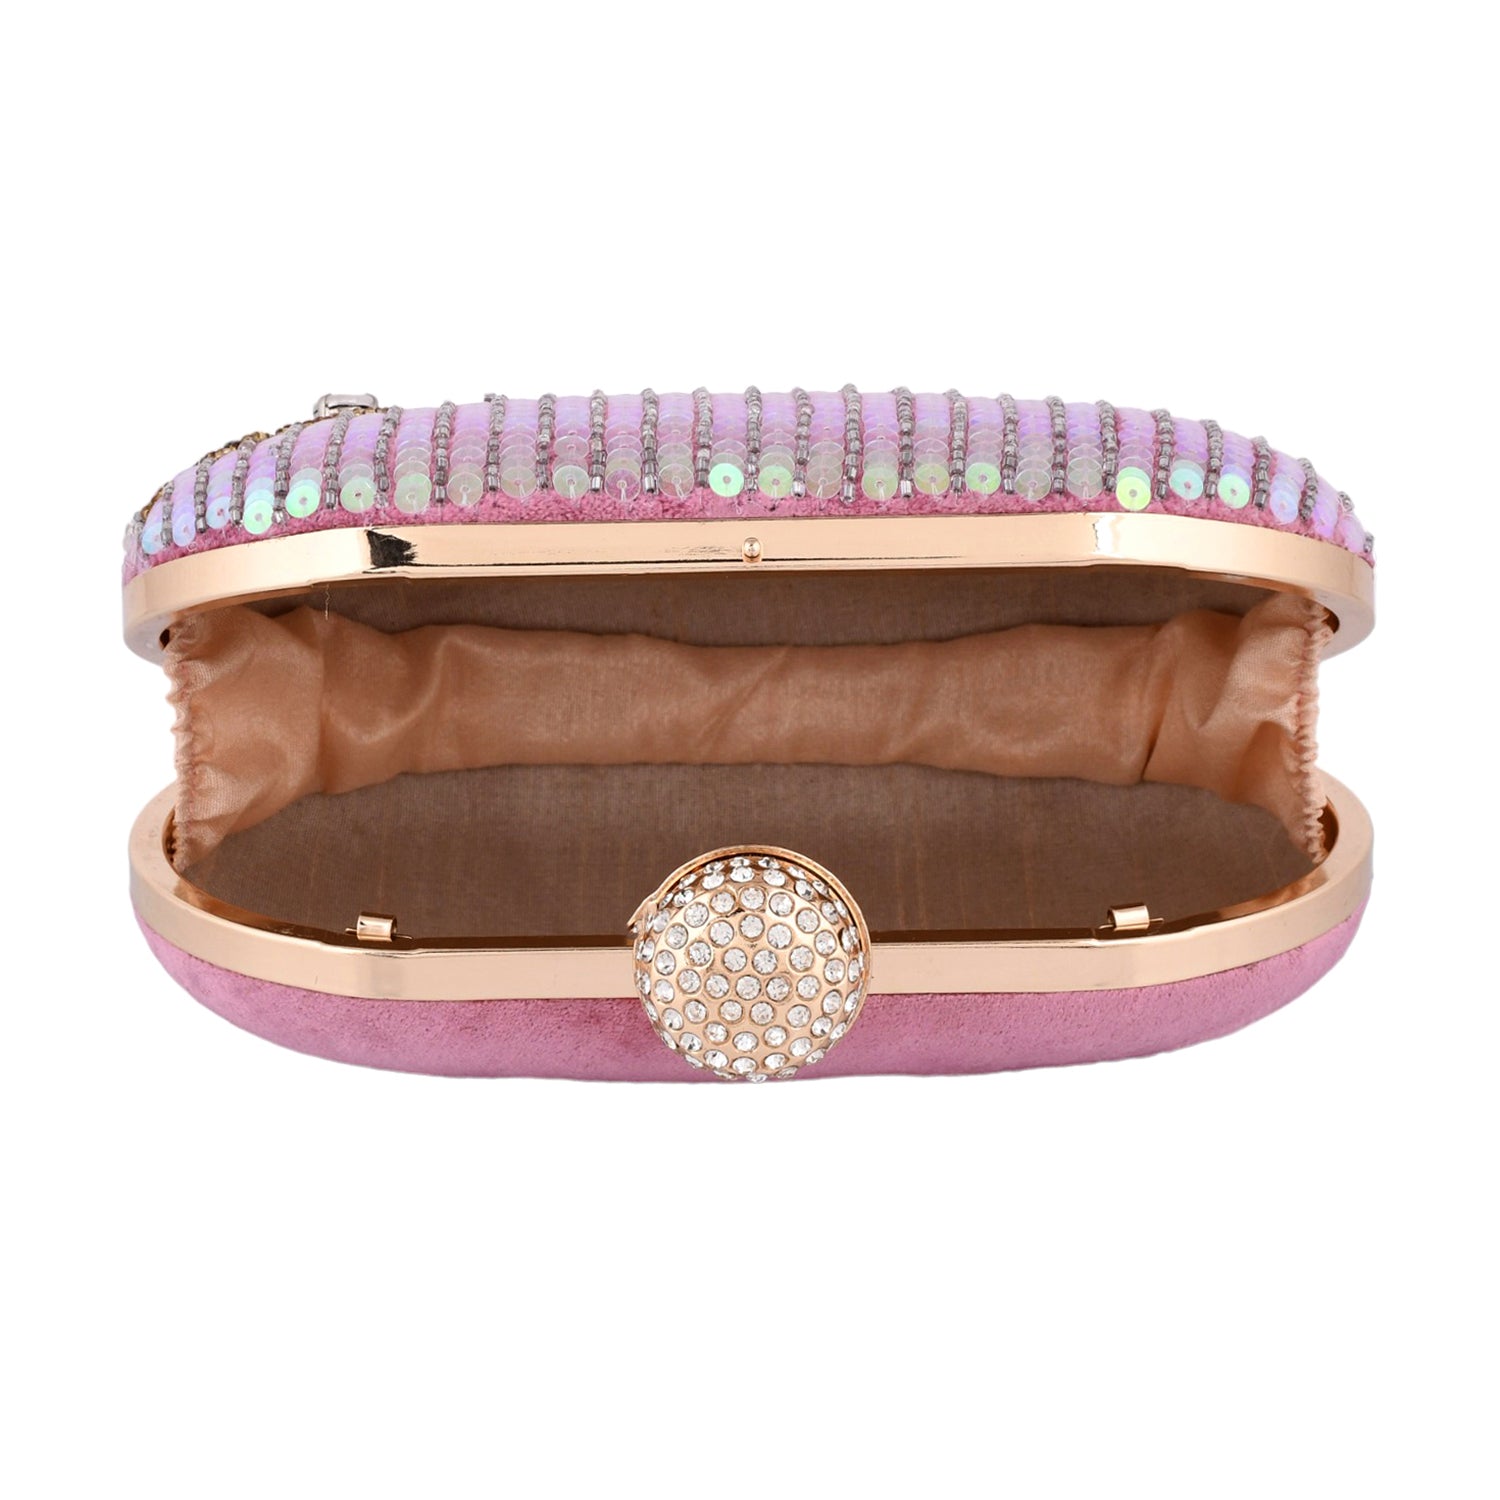 Trendy Bags Multicolored Stones Embellished Pink Clutch